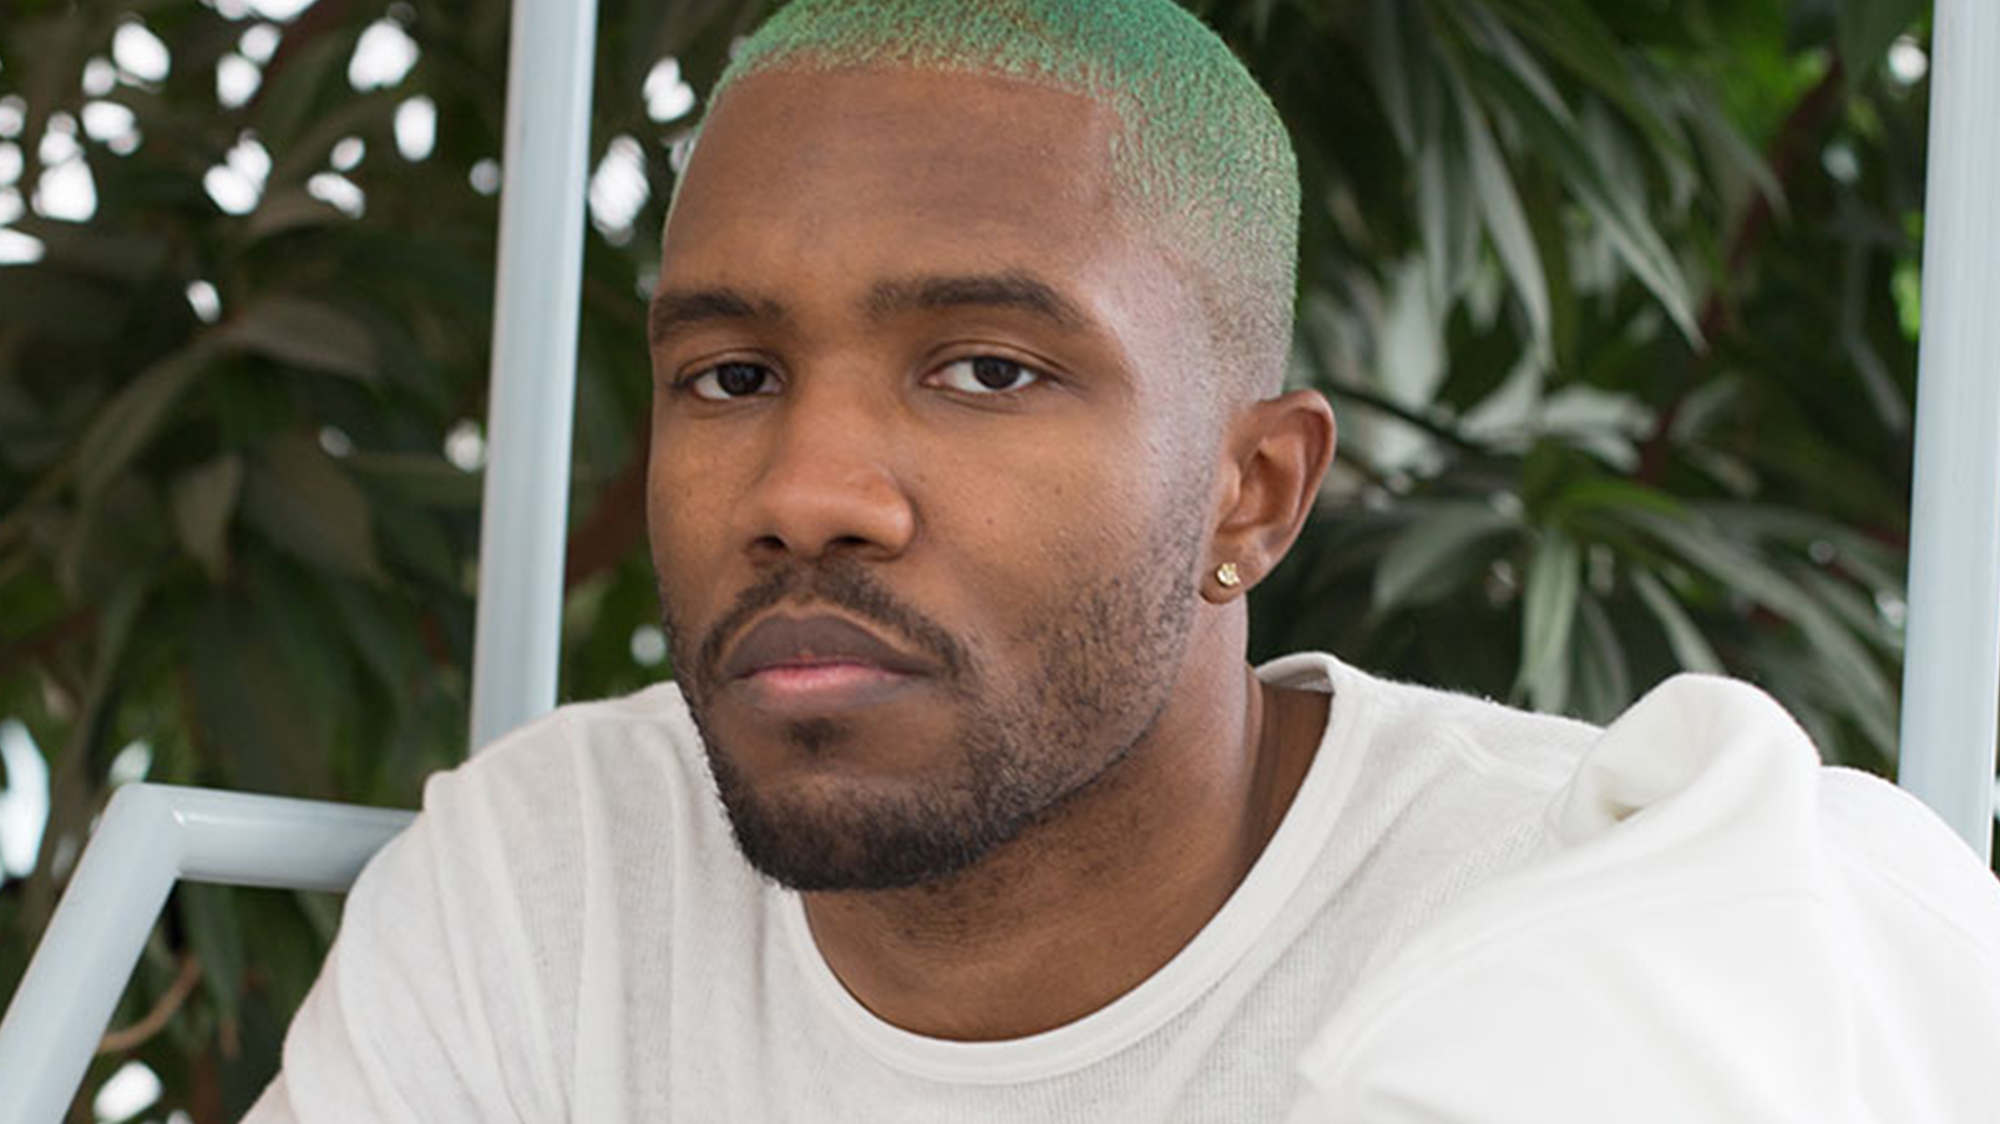 Frank Ocean Just Dropped A Cover Of 'Moon River' And Perfection Didn't Exist Until Now